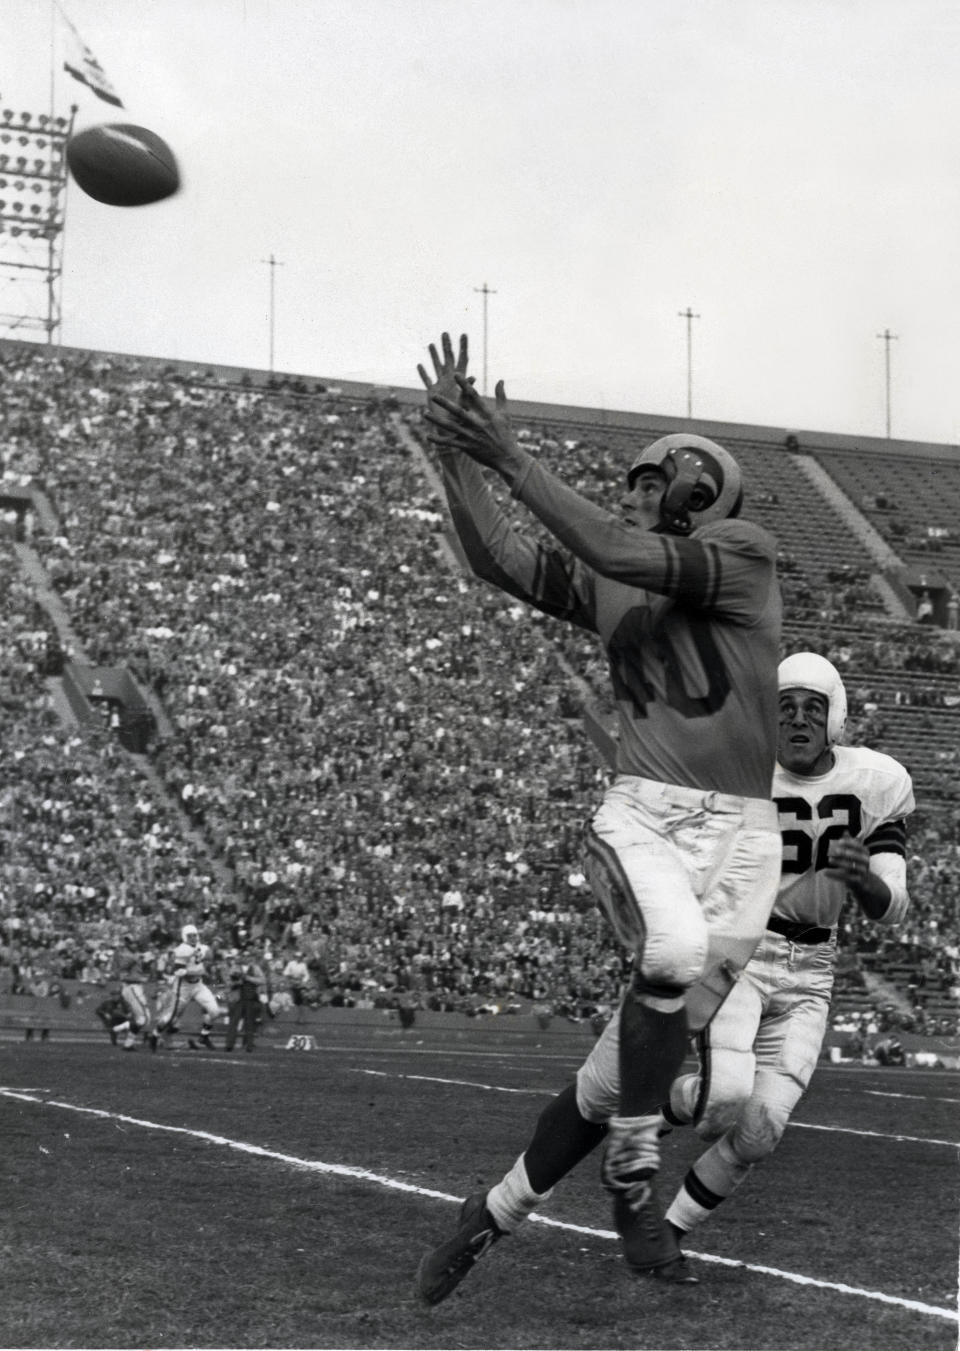 Los Angeles Rams receiver Elroy Hirsch (40) catches a pass in front of Cleveland Browns defensive back Cliff Lewis (62) at the Los Angeles Memorial Coliseum in the 1951 NFL Championship Game. The Rams defeated the Browns 24-17. Darryl Norenberg-USA TODAY Sports